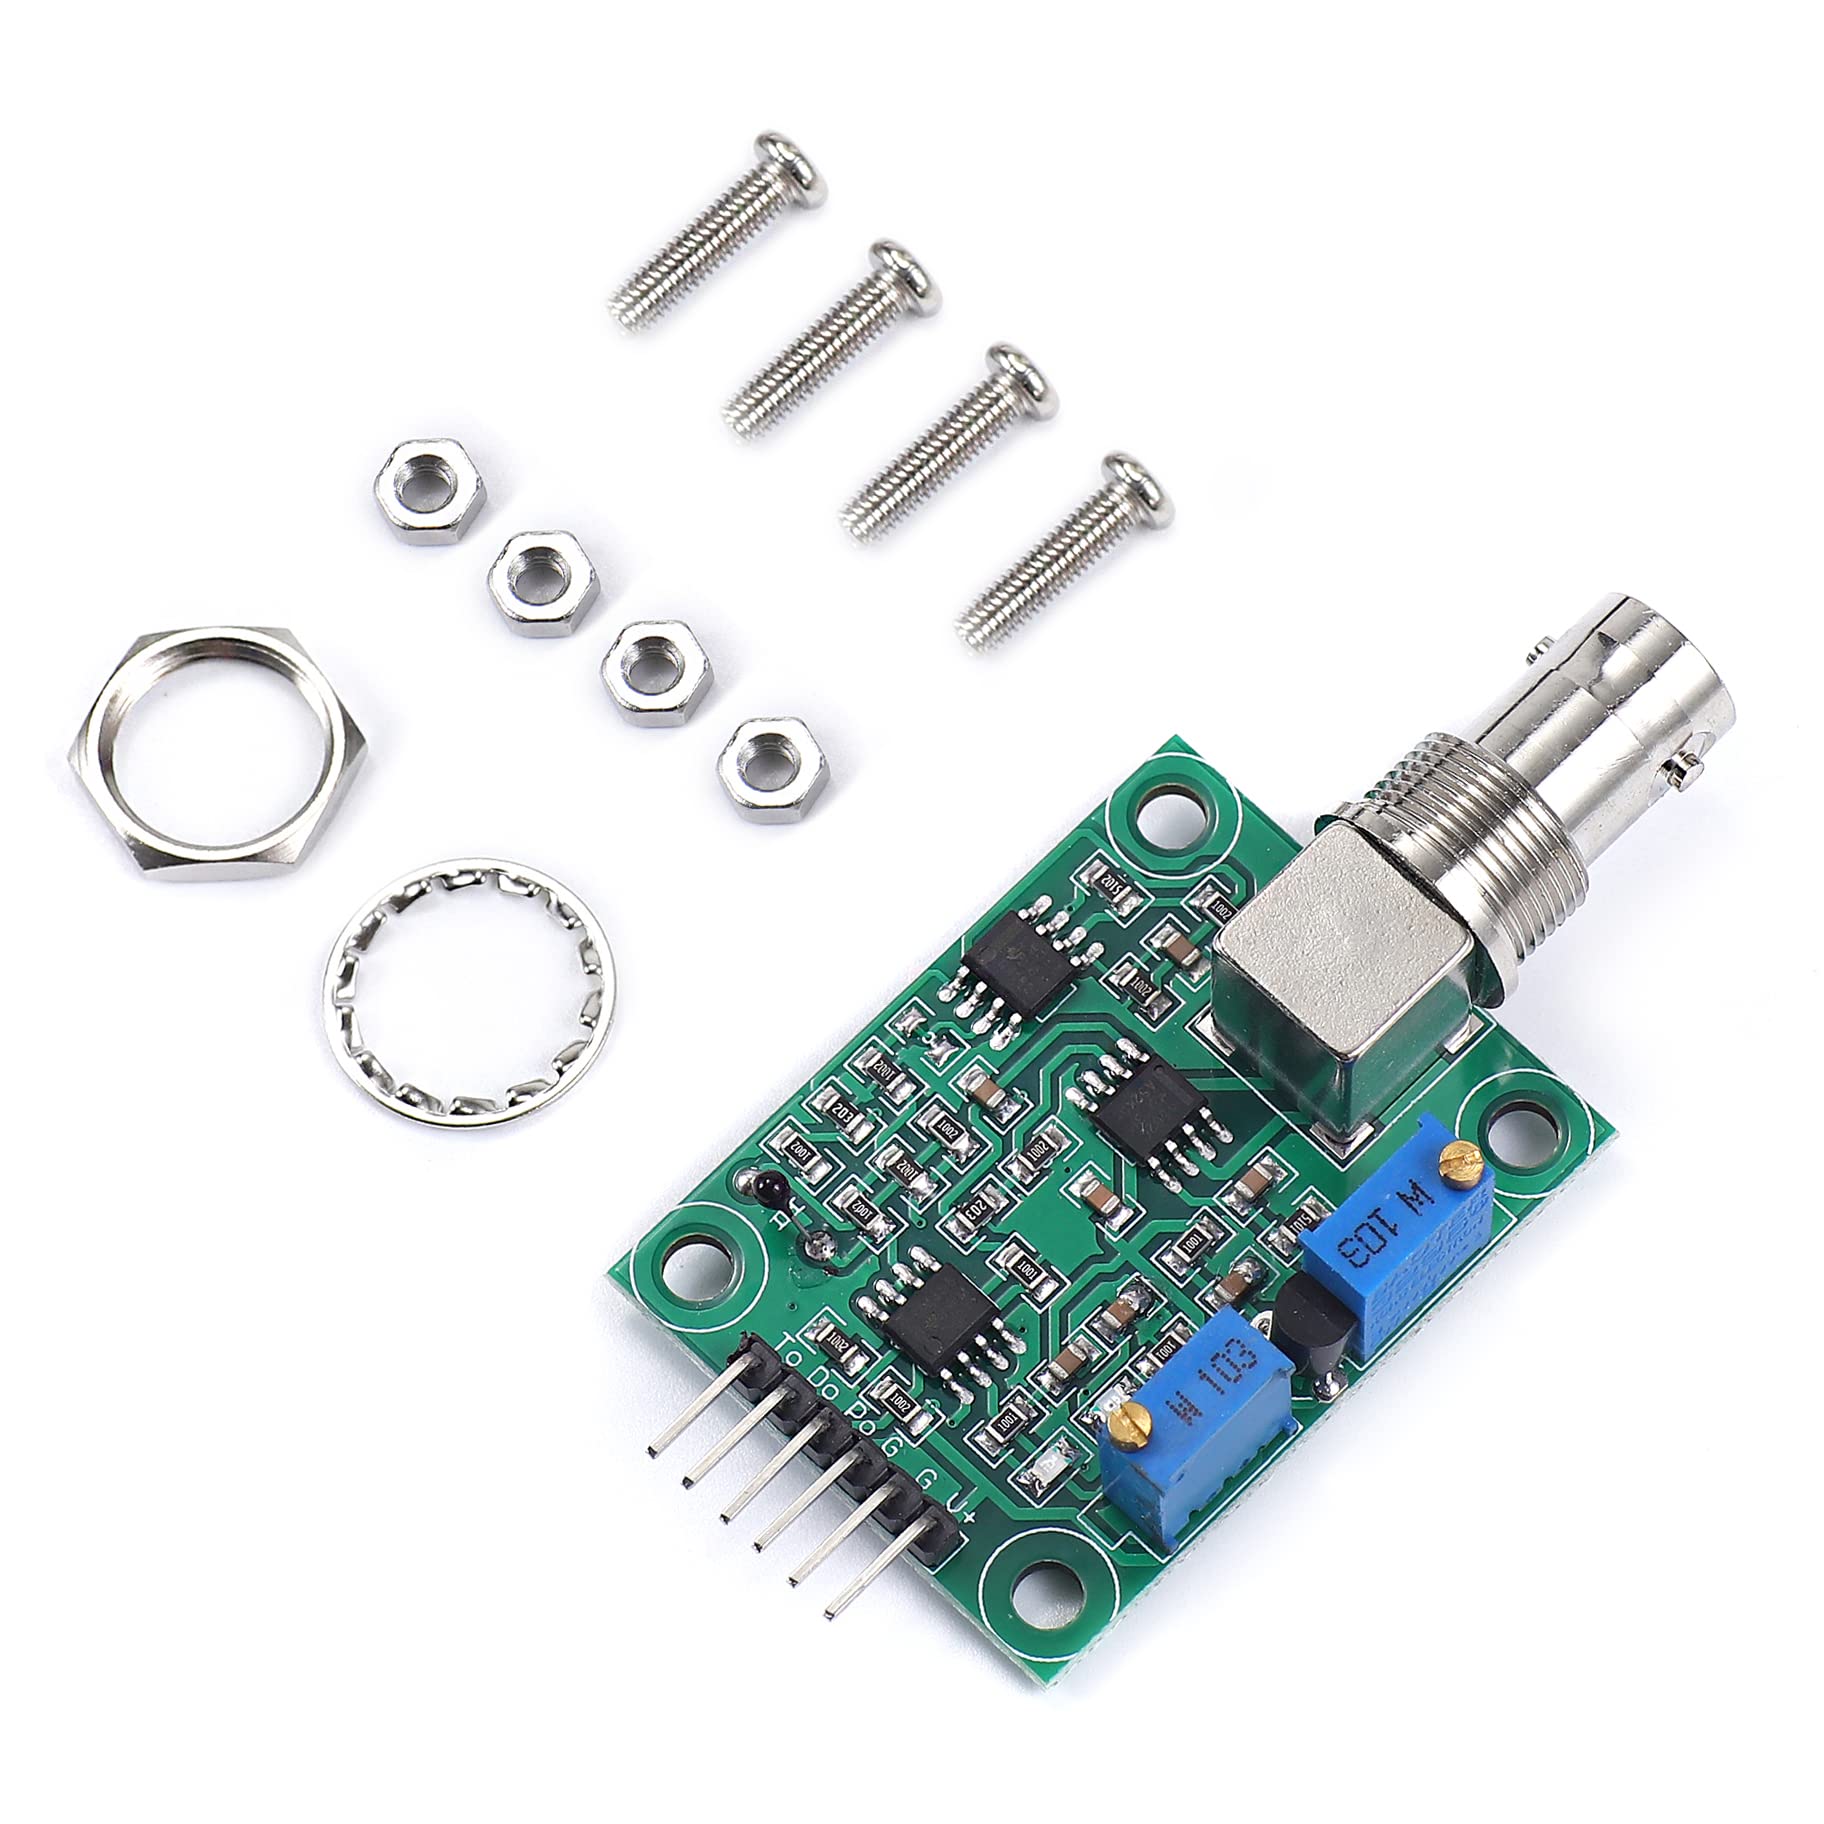 Teyleten Robot PH Value Data Detection and Acquisition Sensor Module Acidity and Alkalinity Sensor Monitoring and Control ph0-14 for Arduino